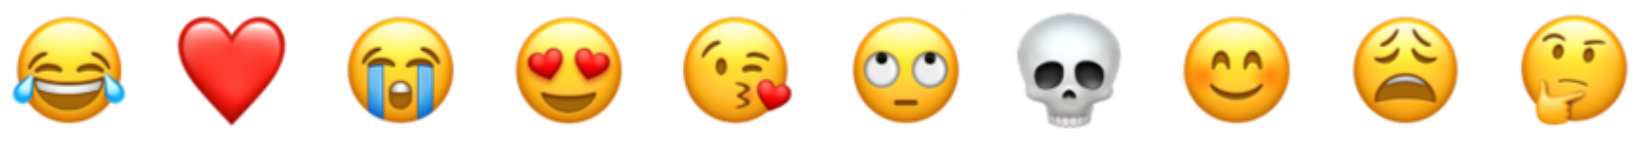 10 of the most popular, frequently-used emoji: laughing face with tears, red heart, crying face, face with red heart eyes, kissing face, face with rolling eyes, skull, smiling face, distressed face, wondering face